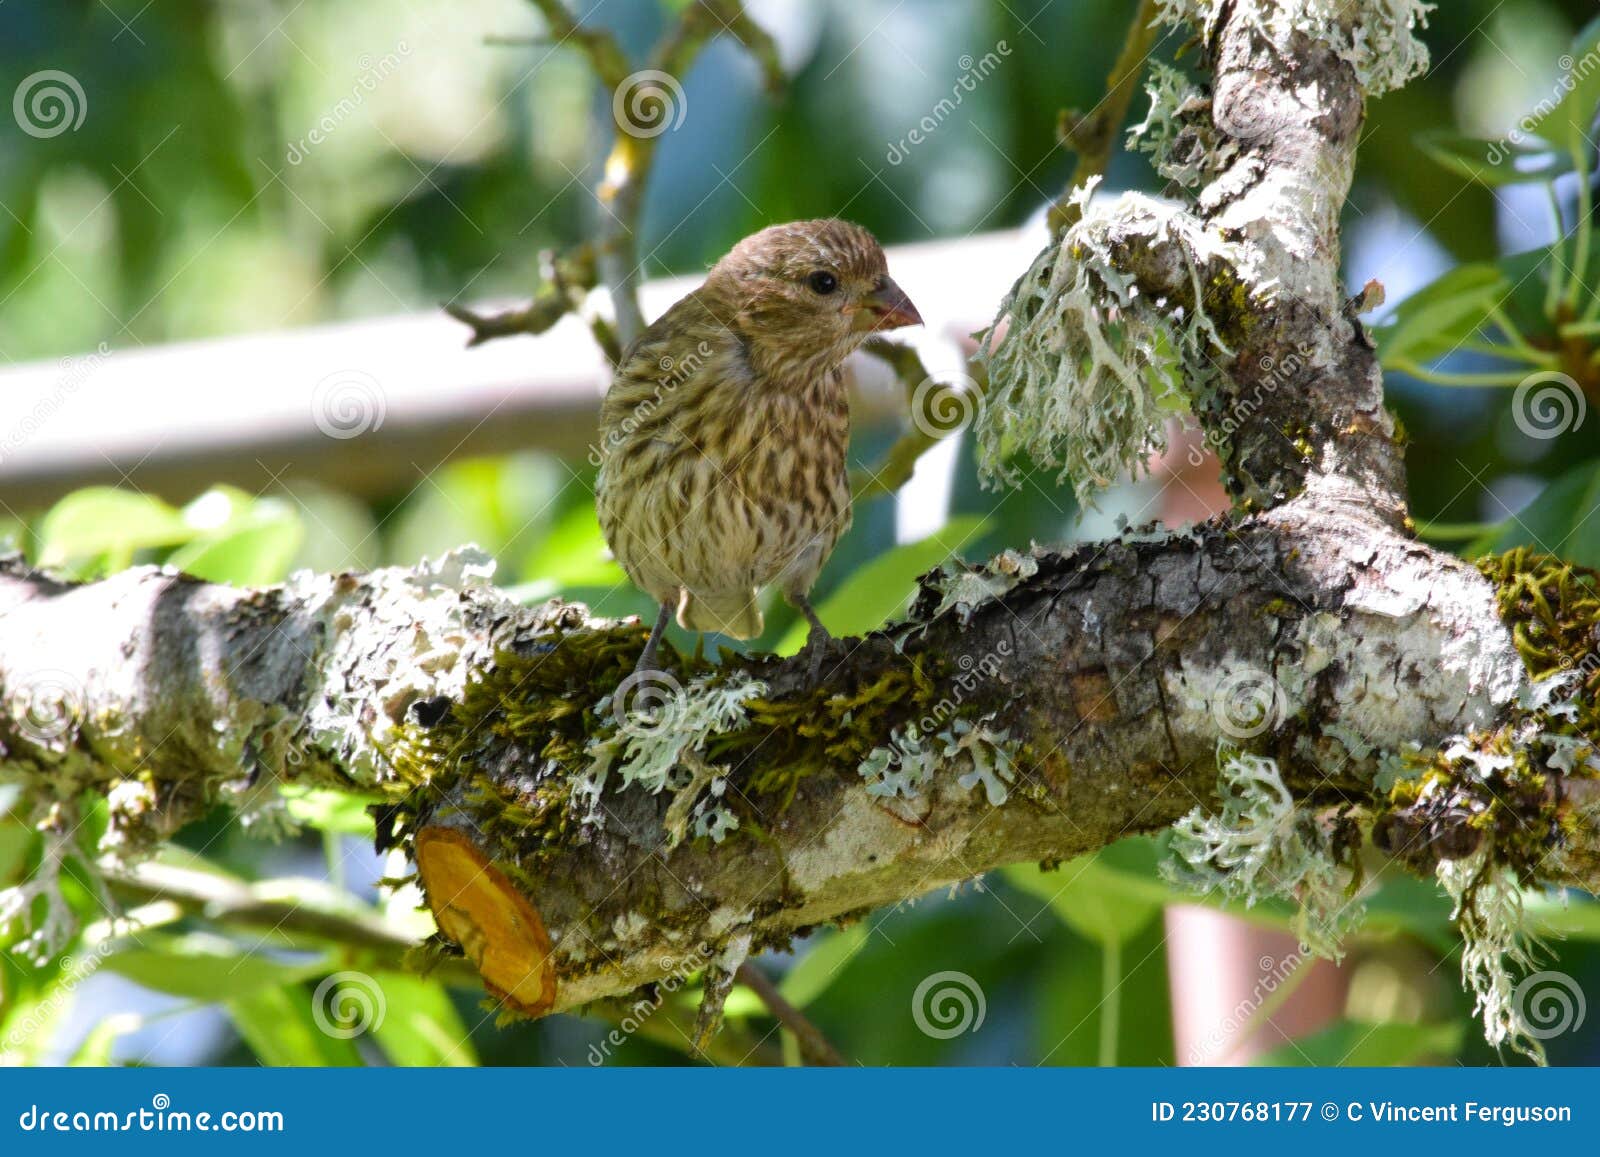 brown striped house finch on branch 13